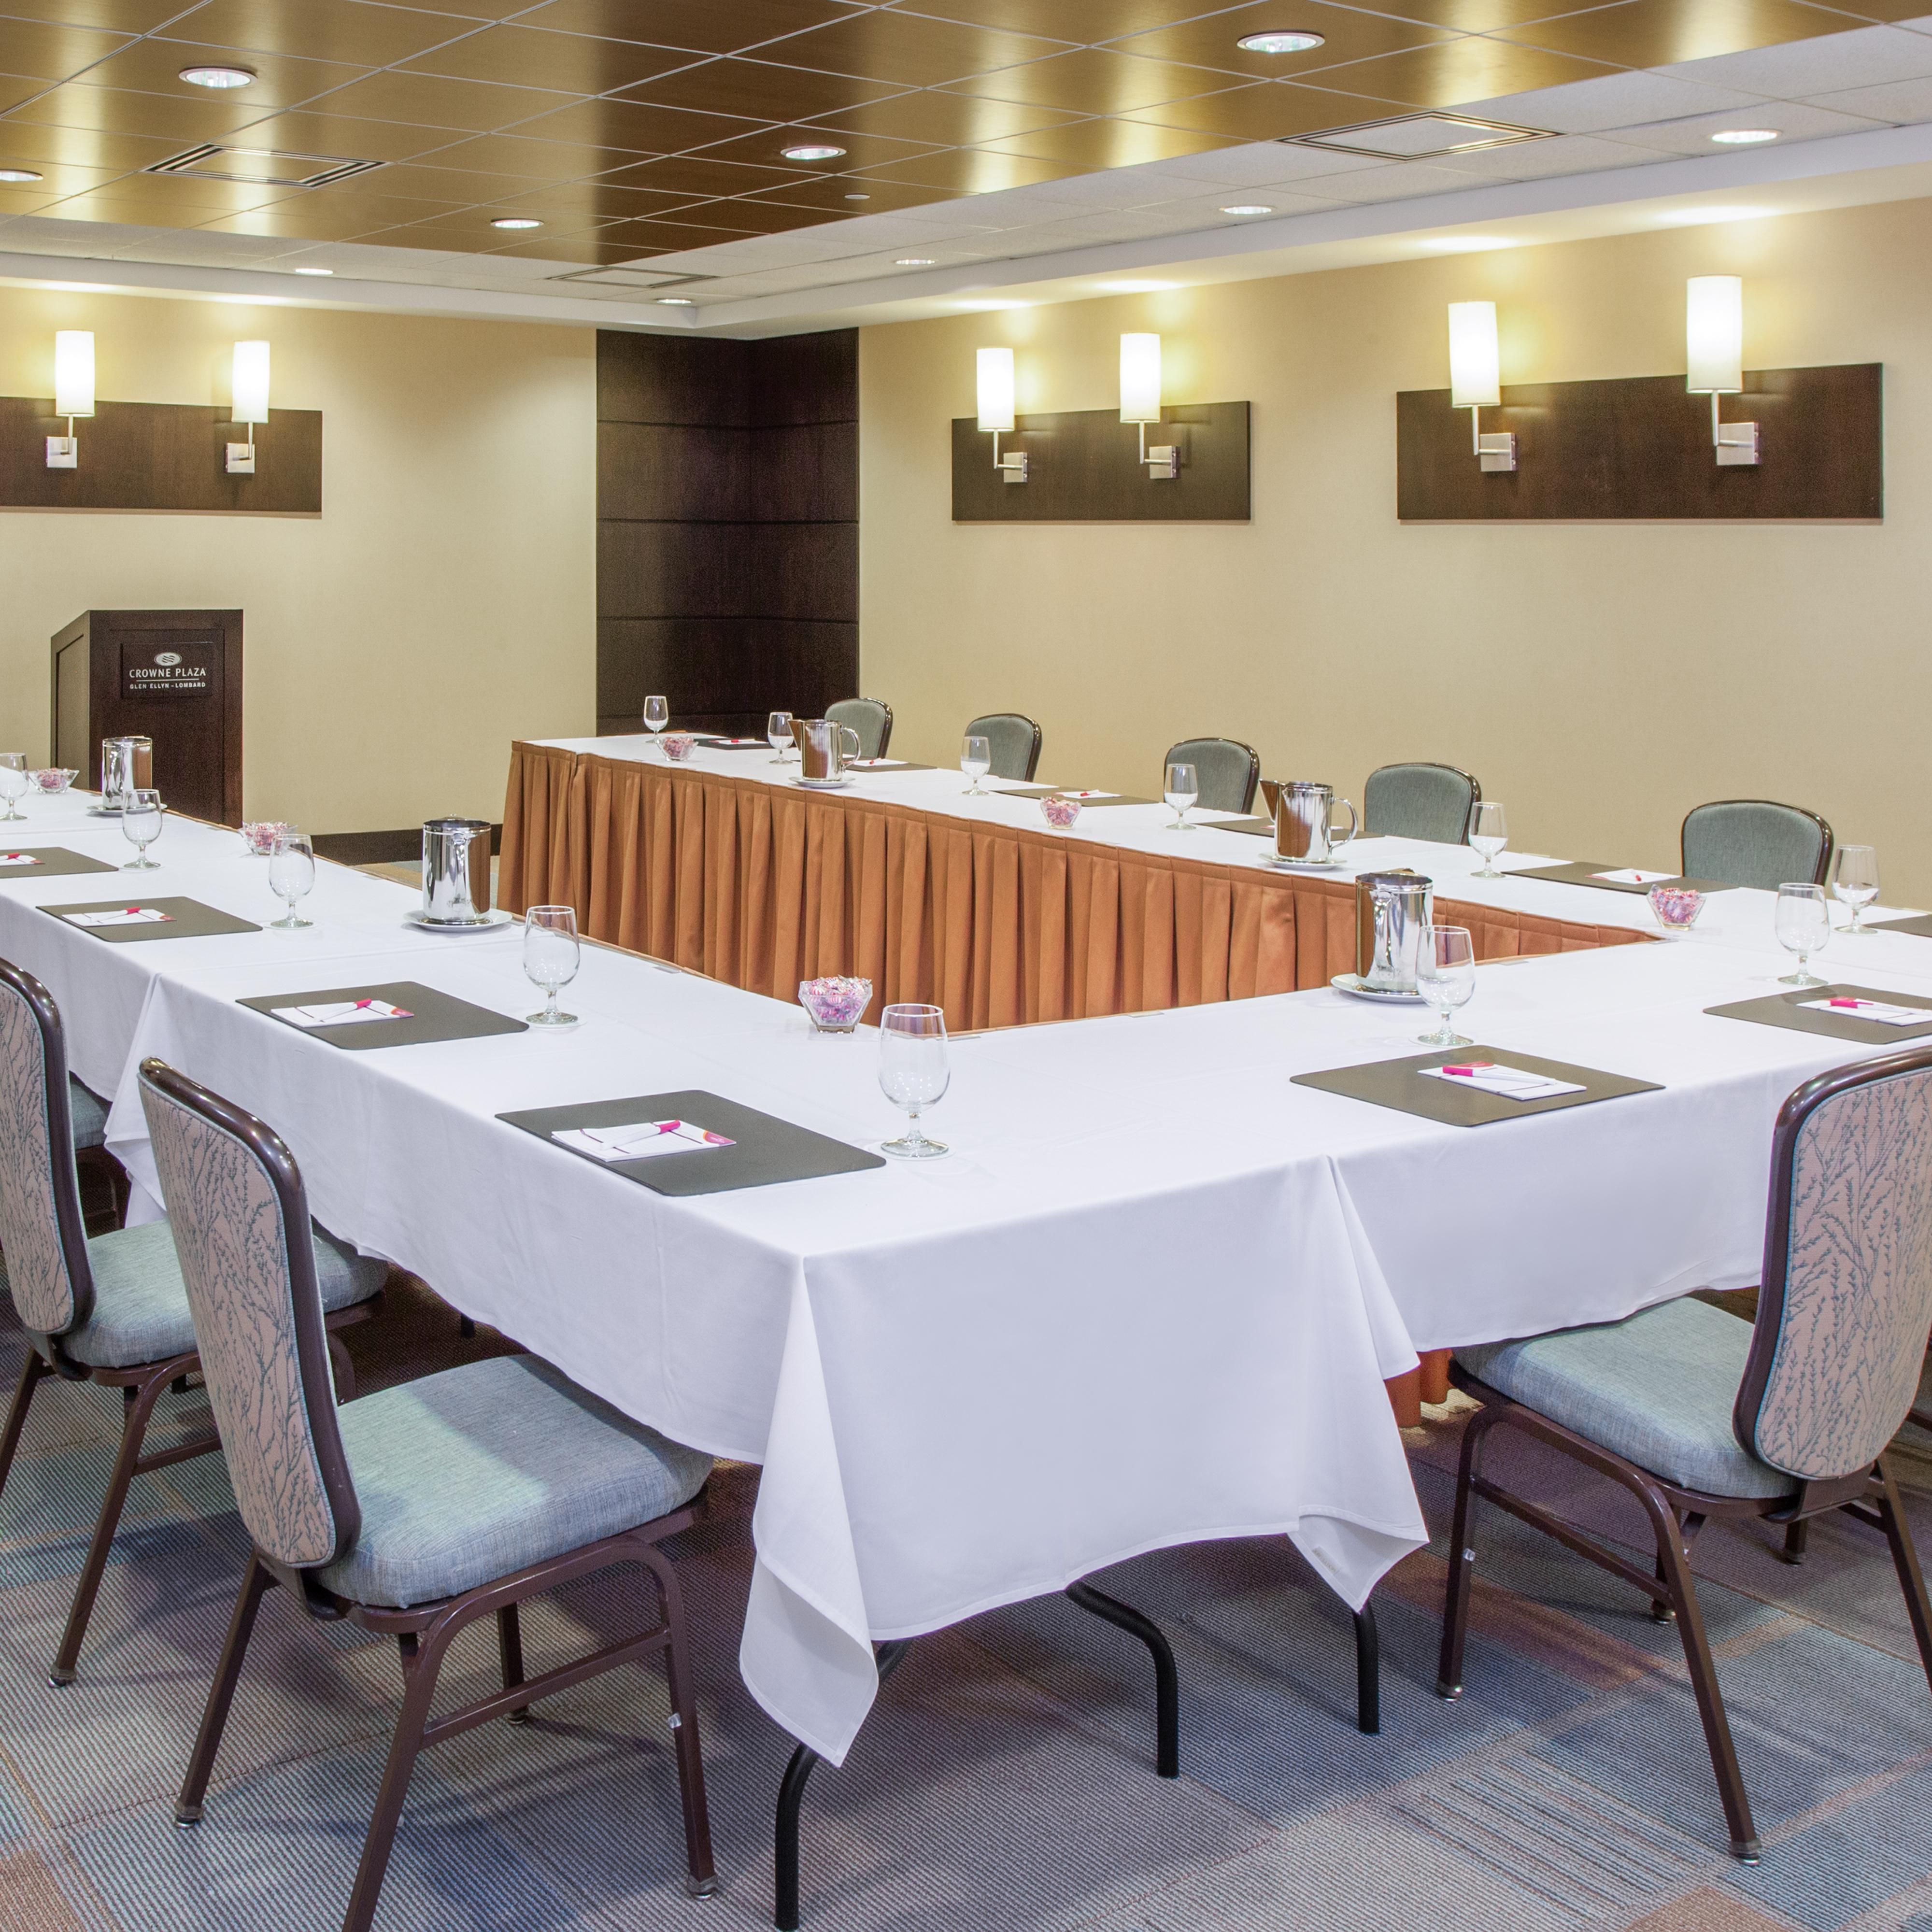 Meadows Room: modern space perfect for your business meetings.